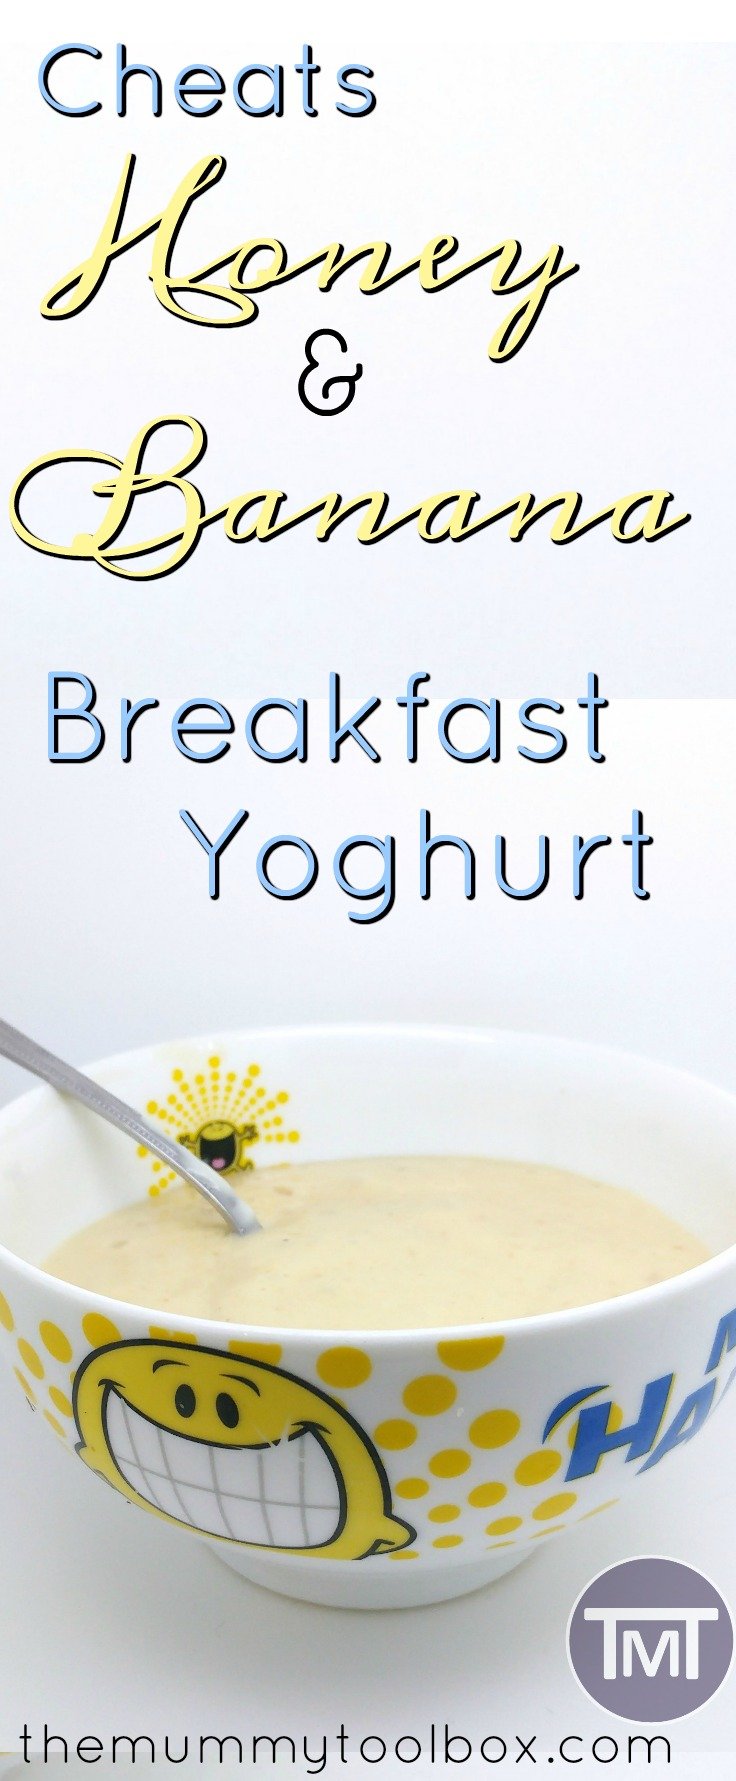 This "recipe" is delicious, healthy for the kids and is a totally customisable breakfast yoghurt for everyone to enjoy. Plus it's horrendously easy!